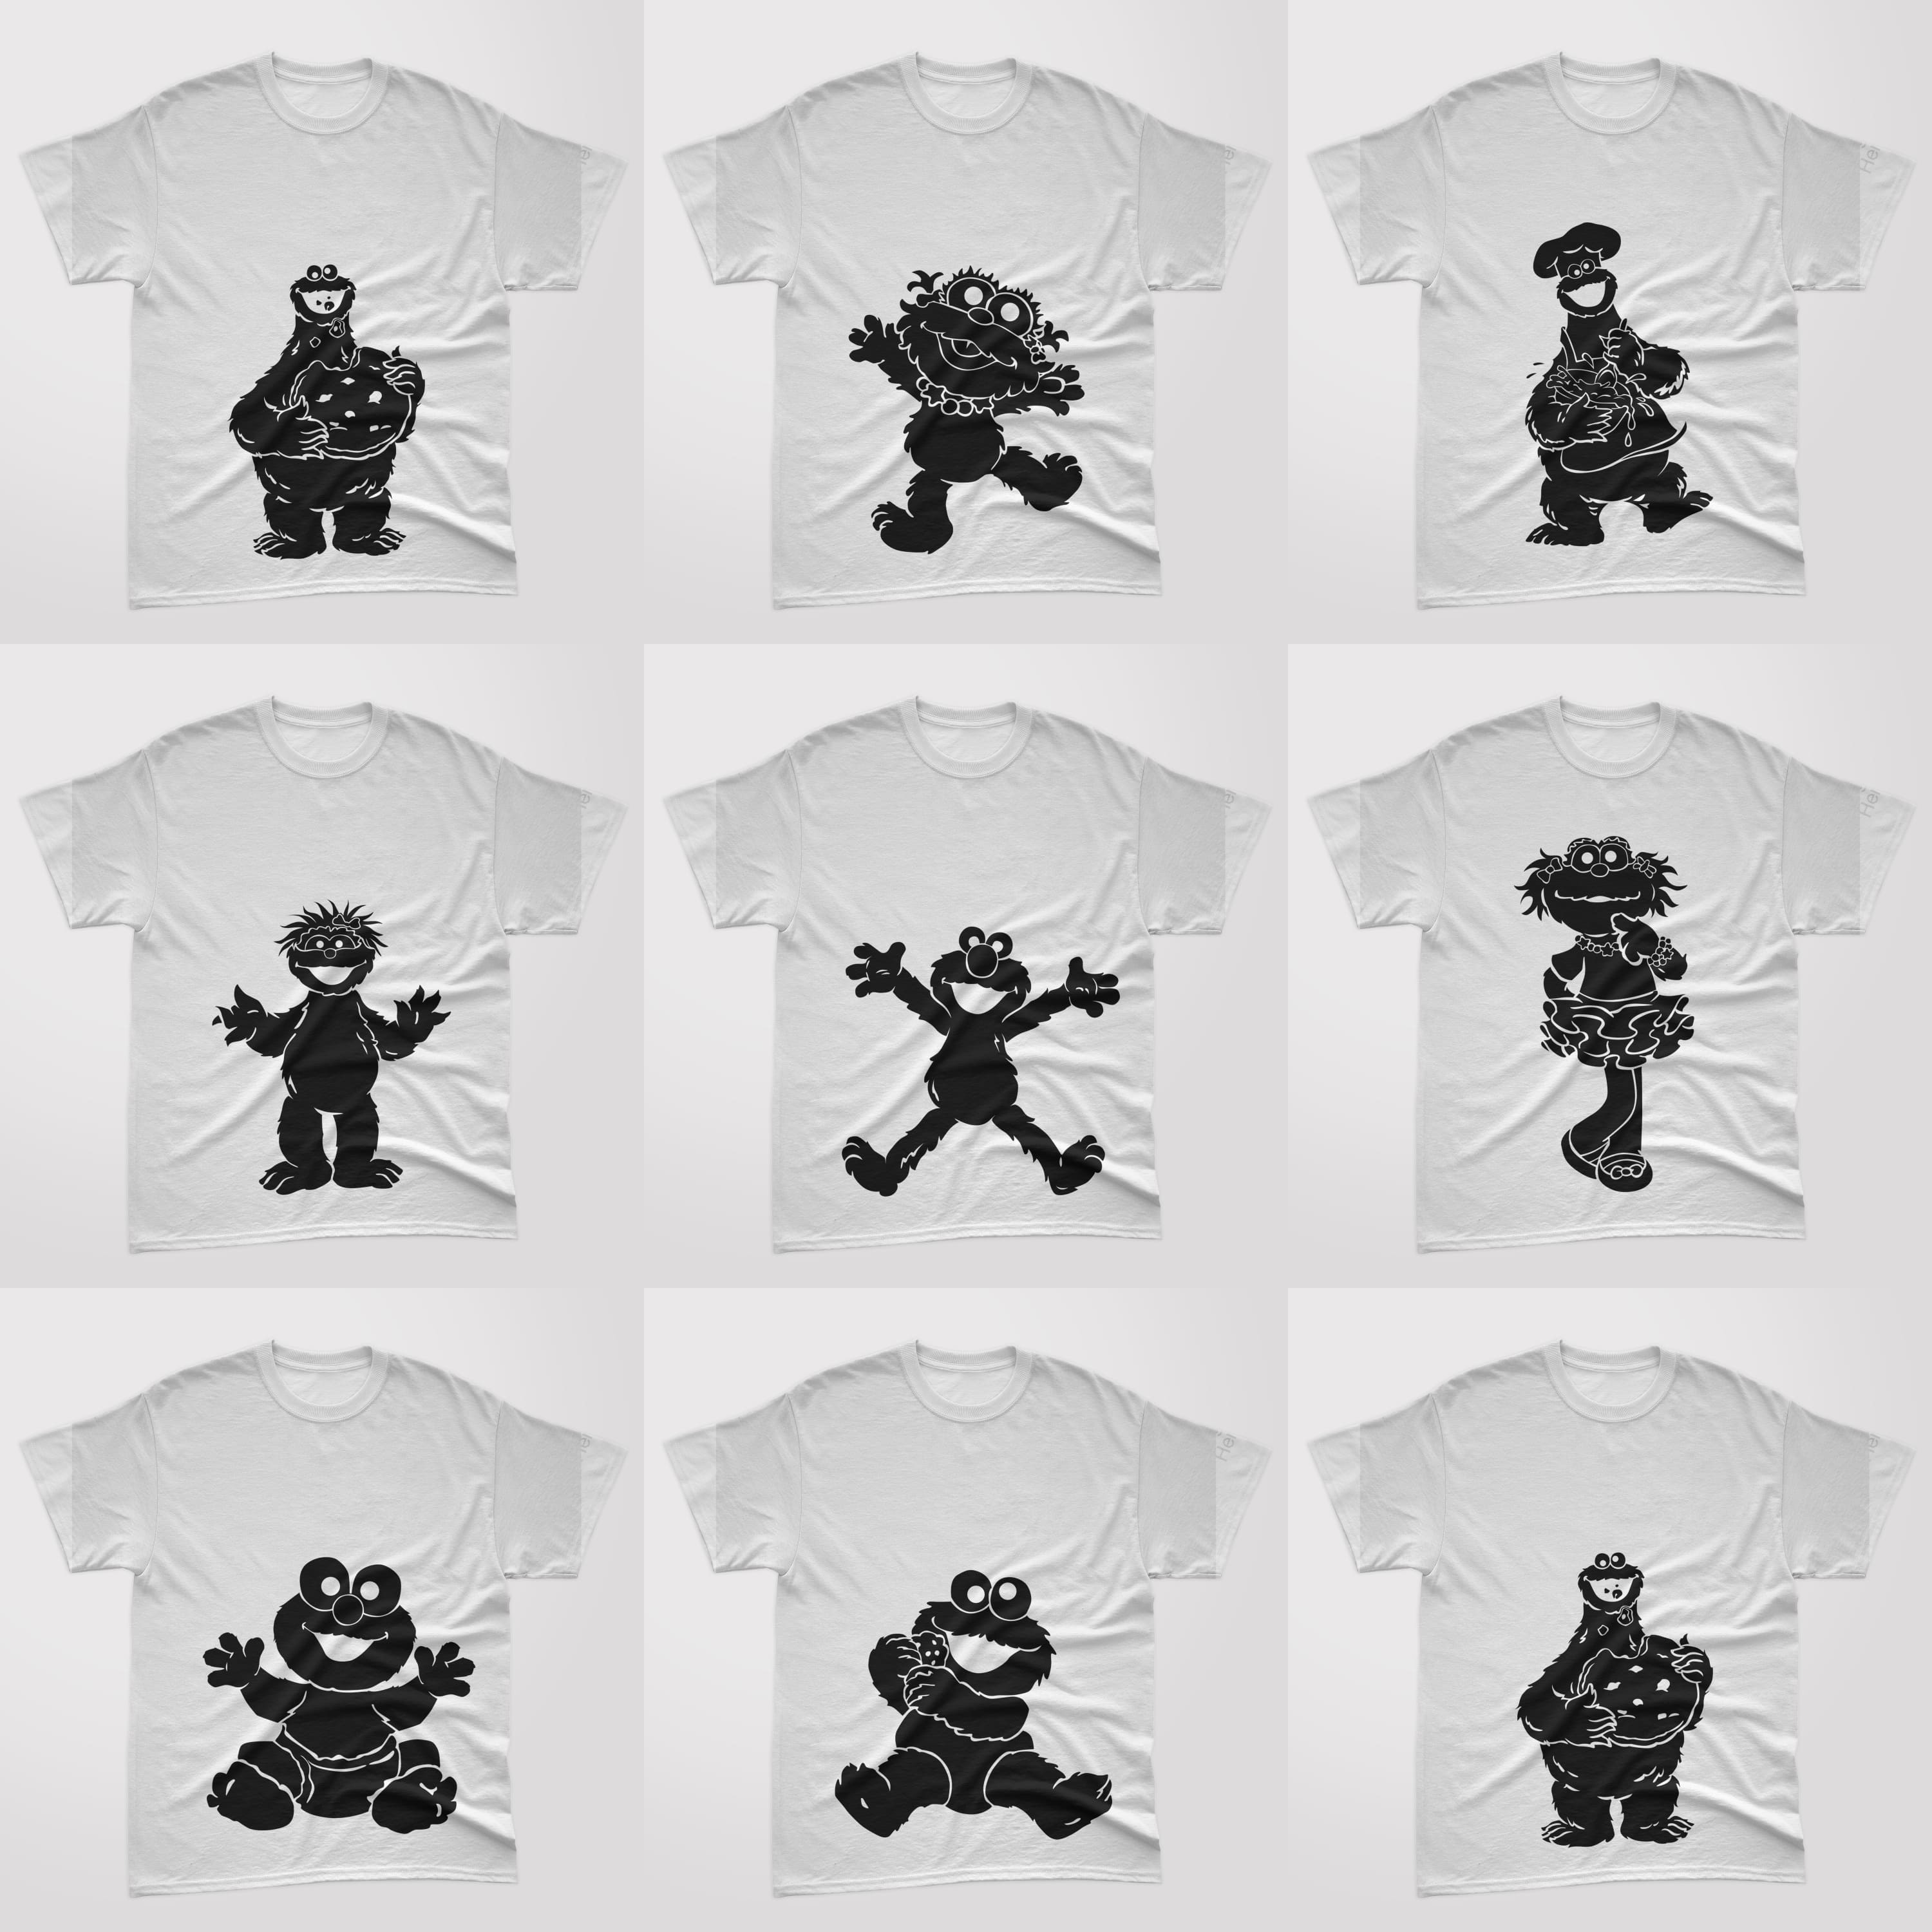 Silhouette Cookie Monster T-shirt Designs Bundle Cover.